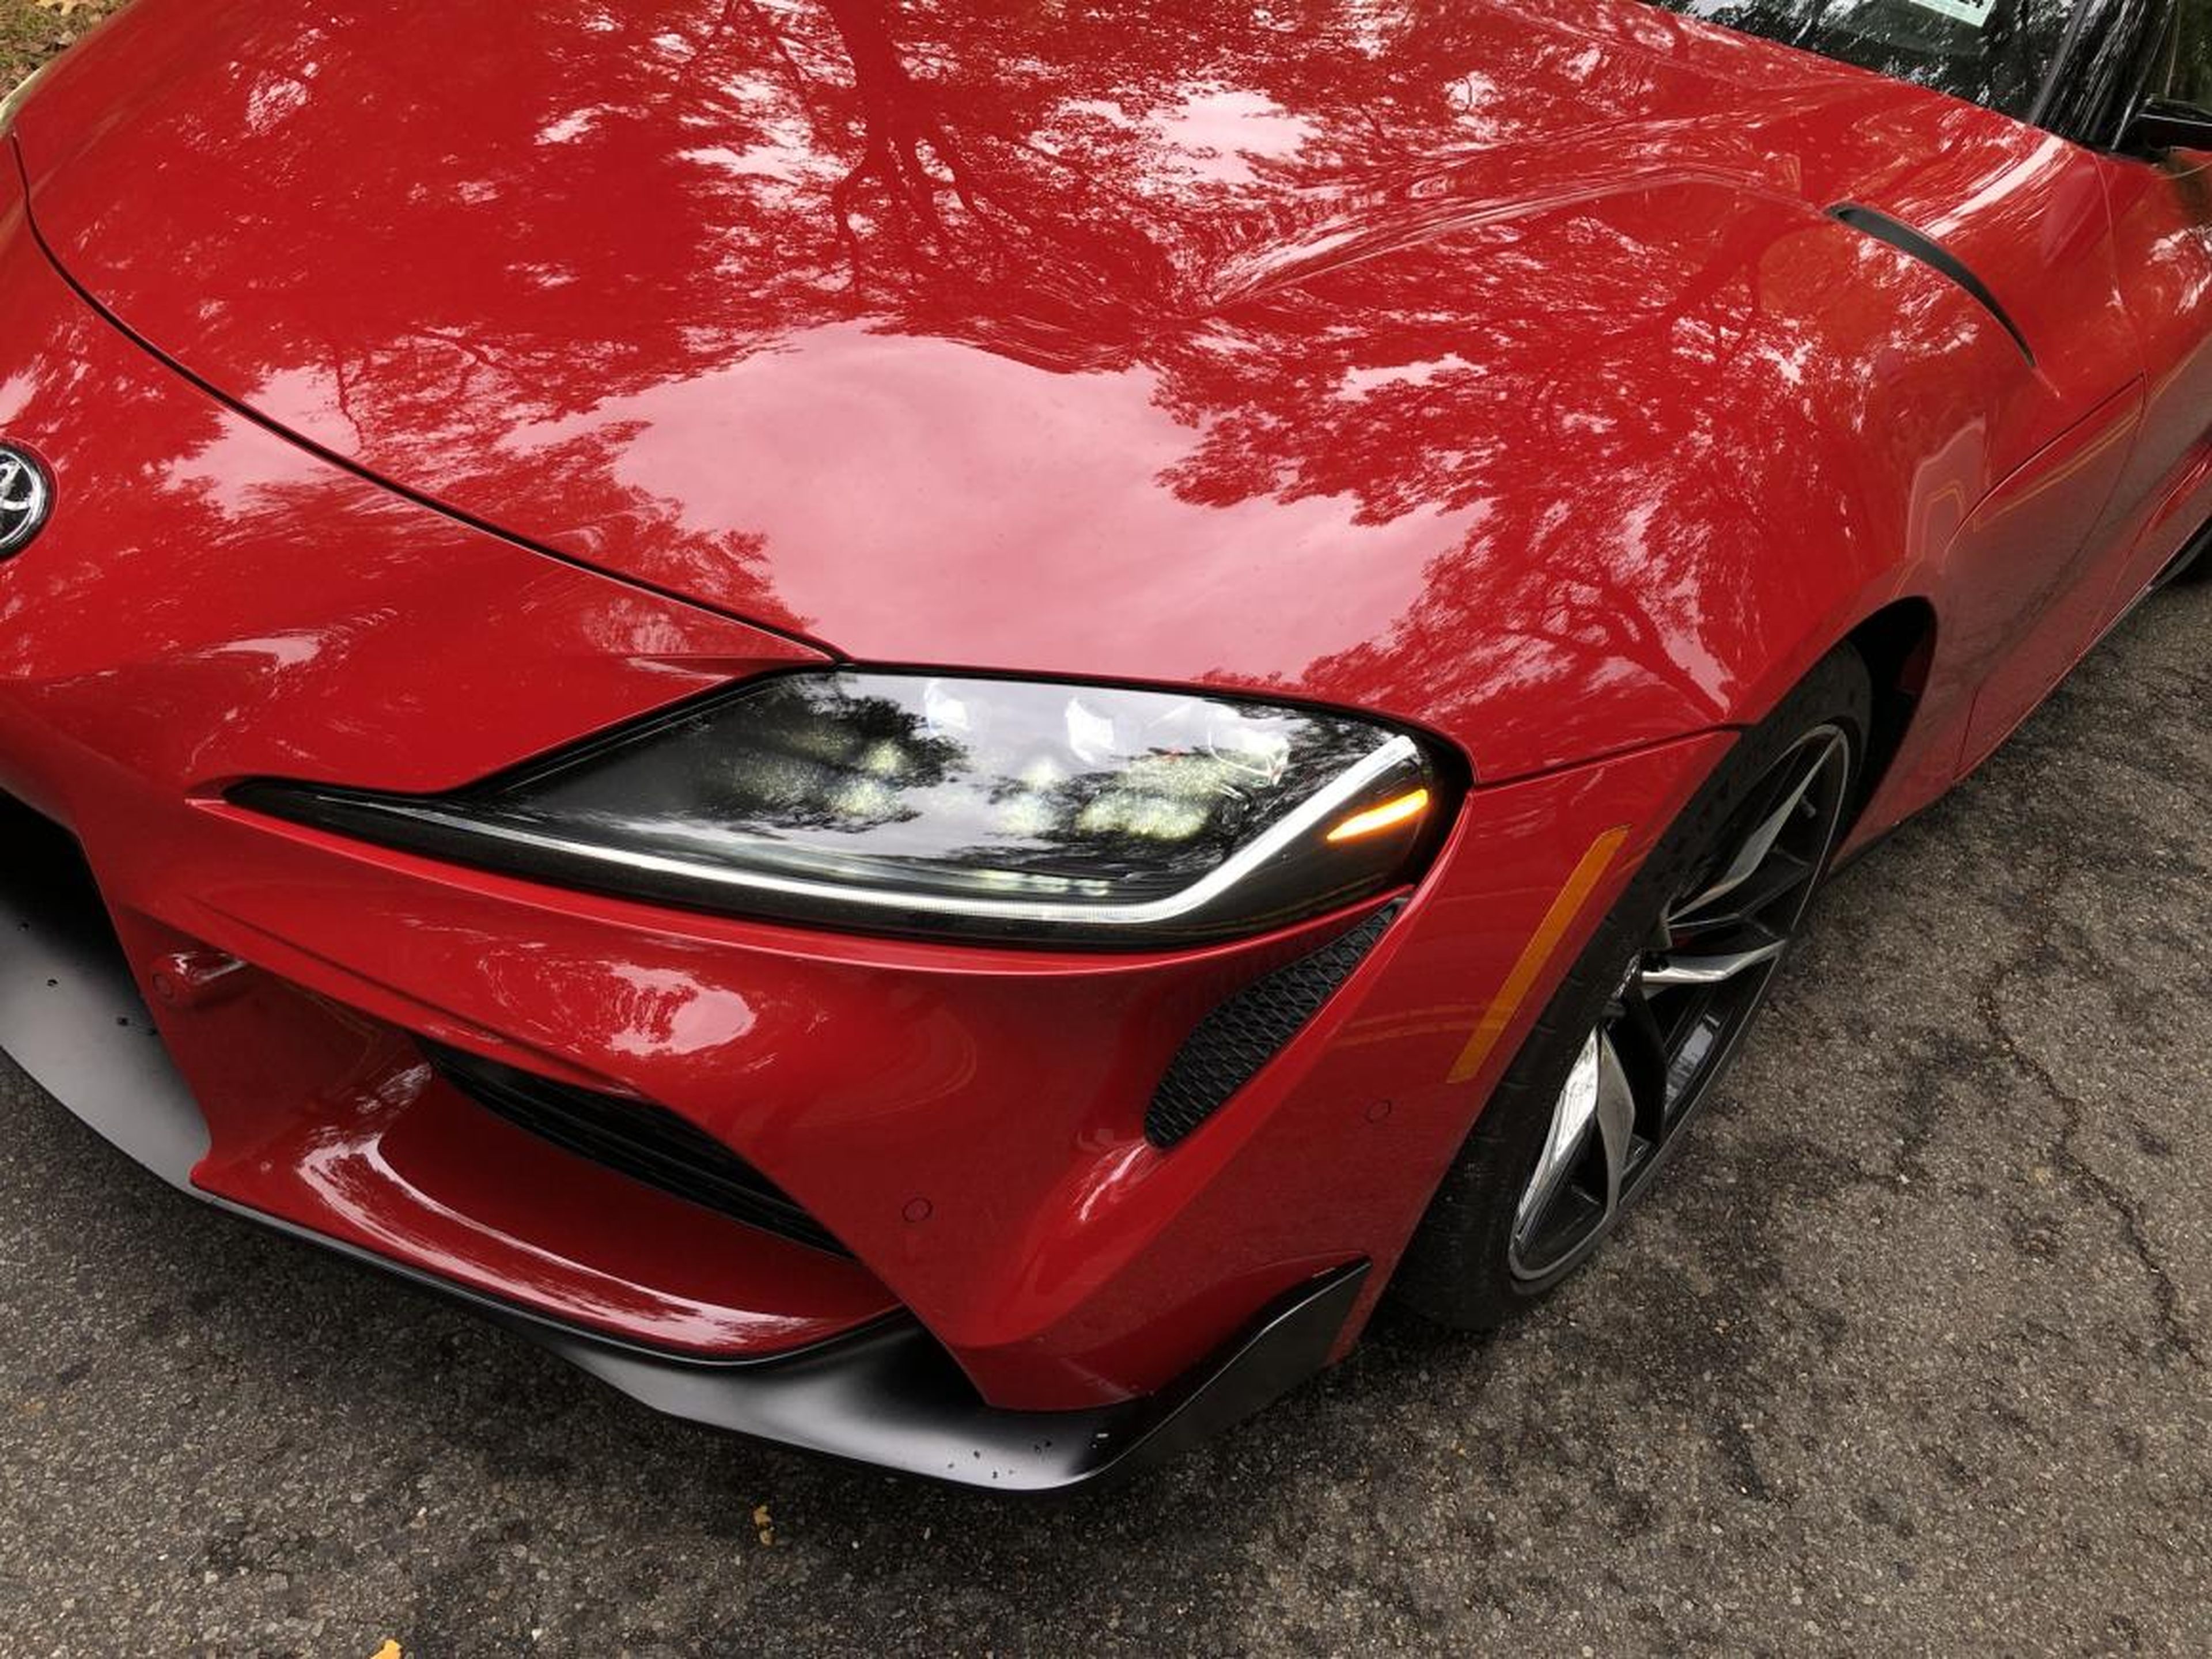 I guess what I dislike is the foldy-swoopy-curvy mashup. That said, designer Nobuo Nakamura clearly executed an overall vision with the Supra. Those are eight-lens auto-leveling LED headlights, by the way.